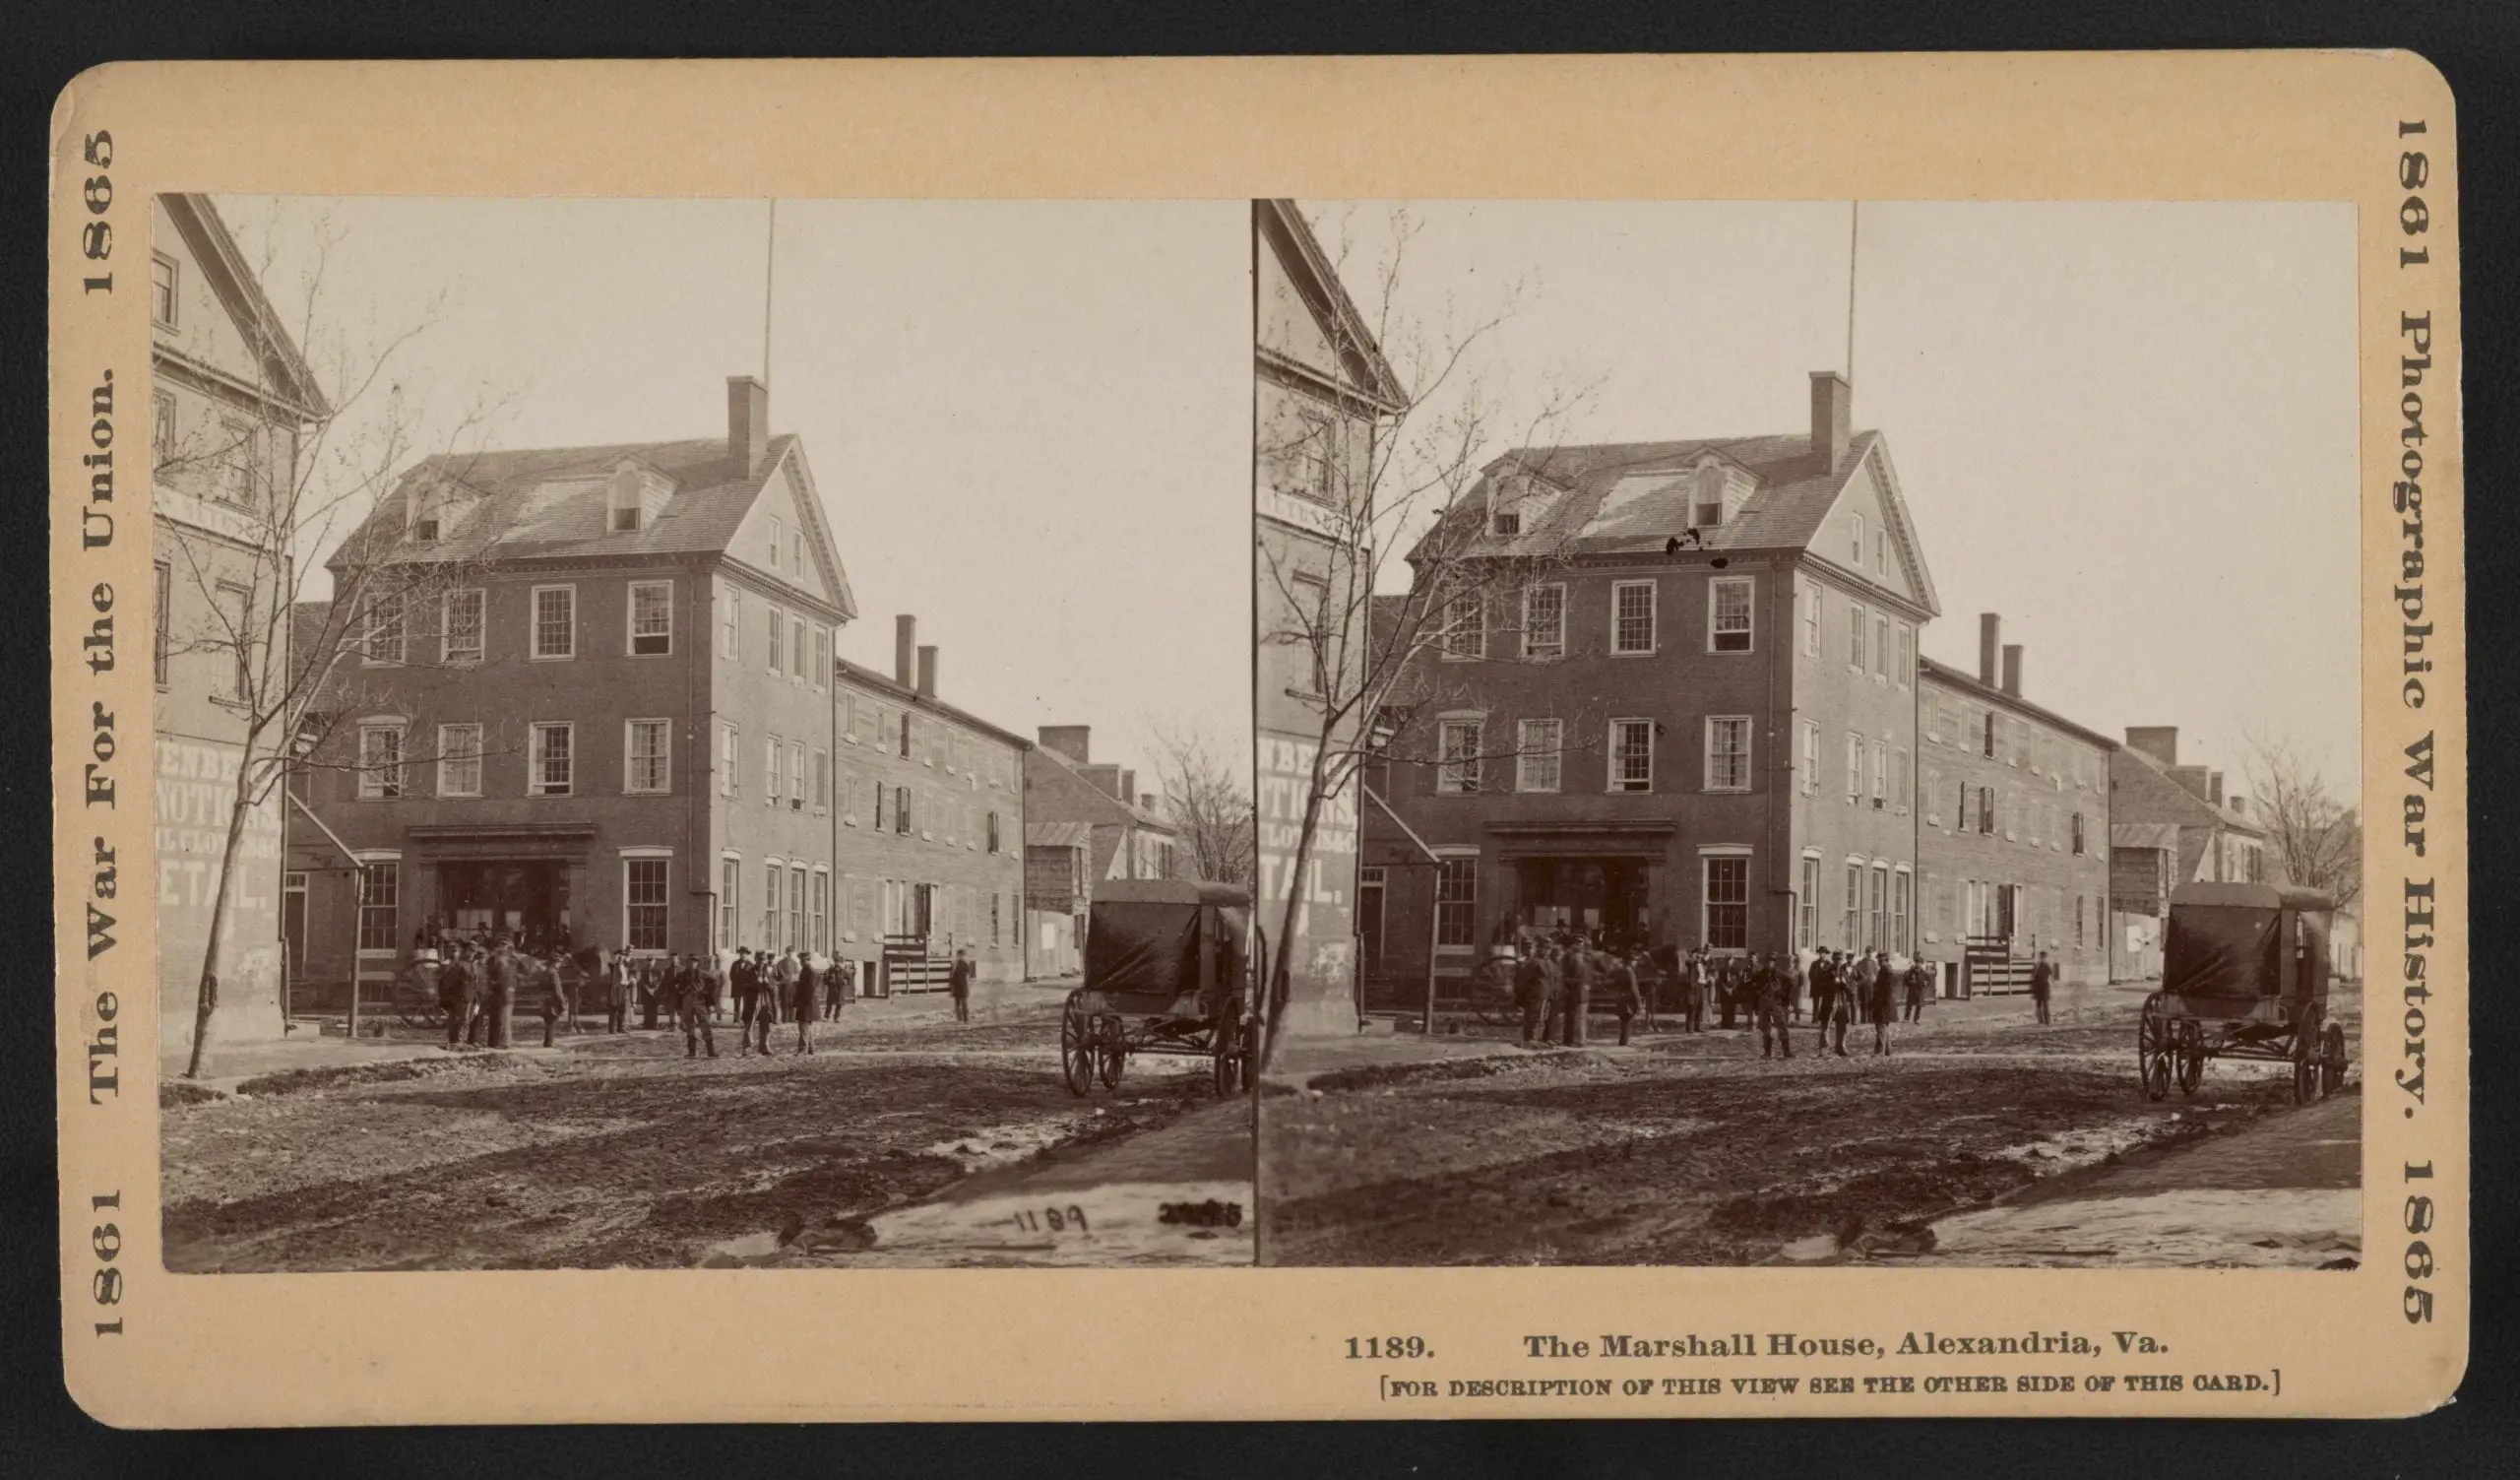 The Marshall House in Alexandria during the Civil War